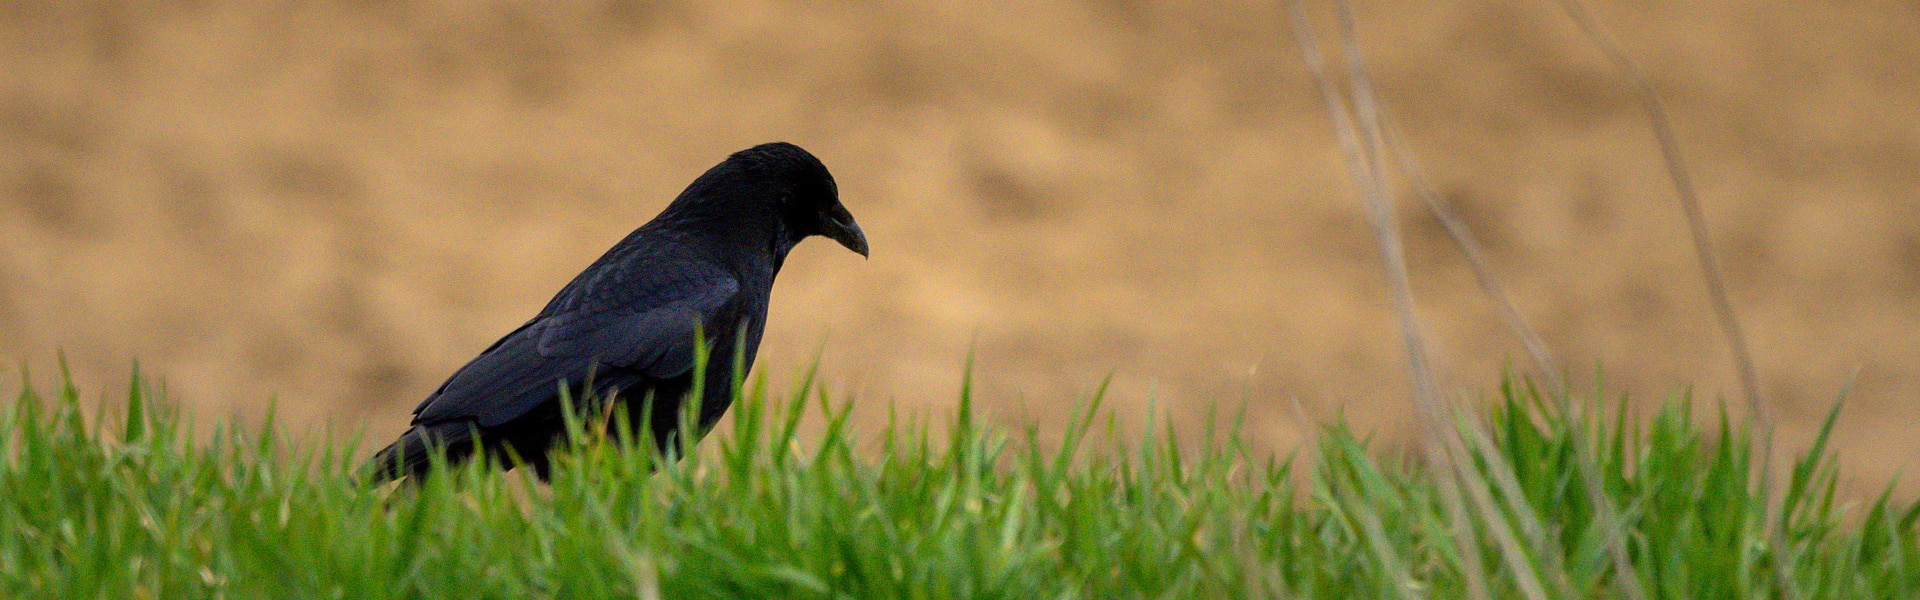 A crow in a field